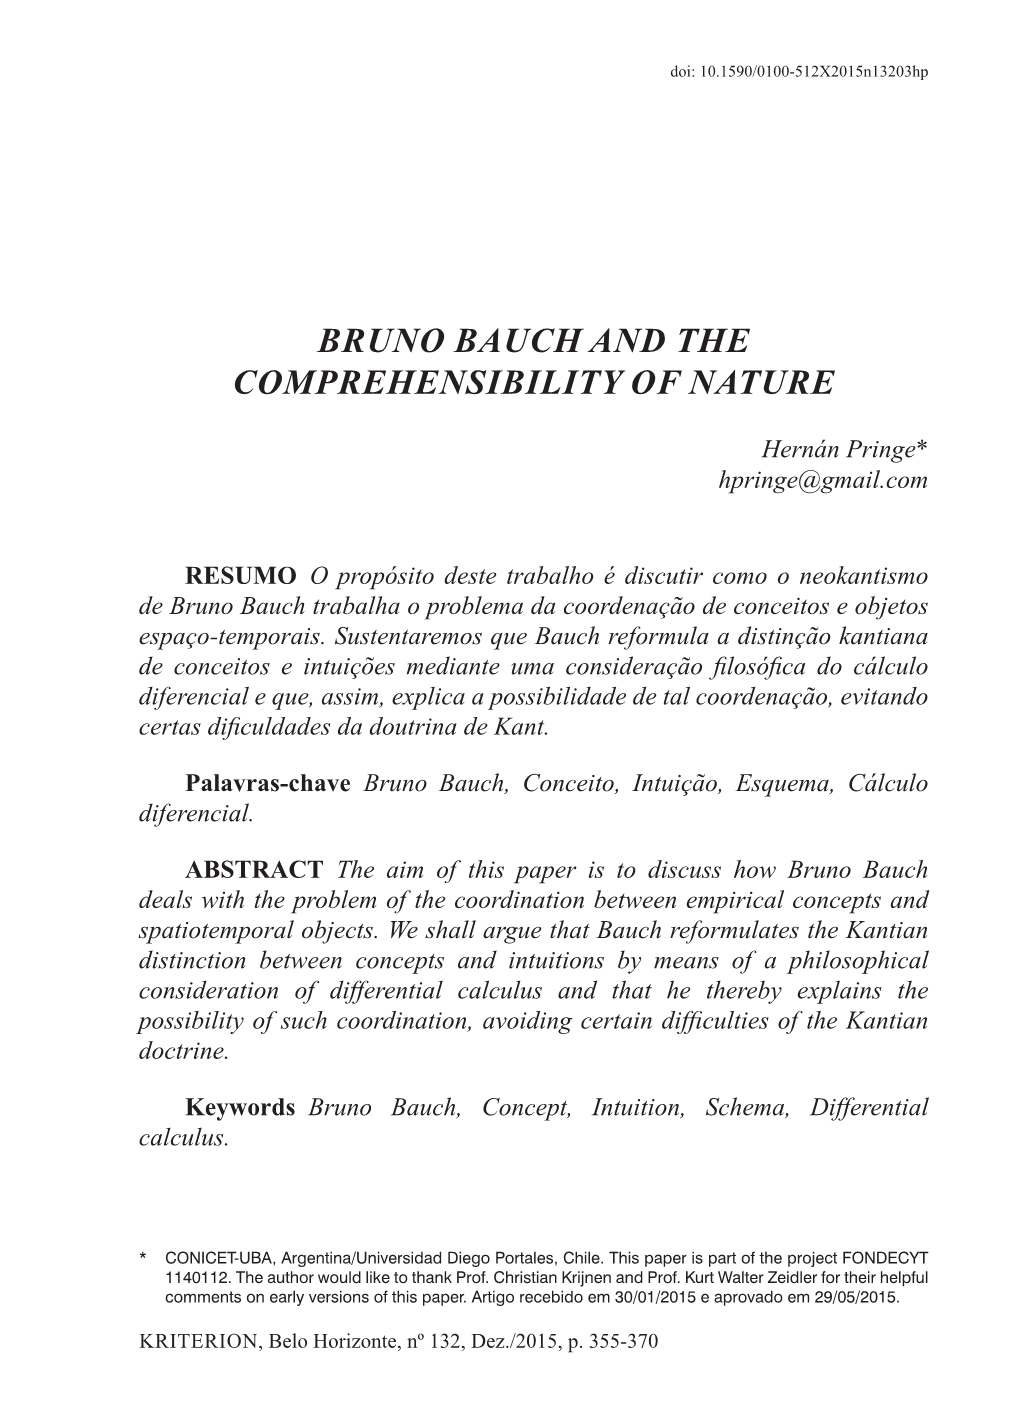 Bruno Bauch and the Comprehensibility of Nature